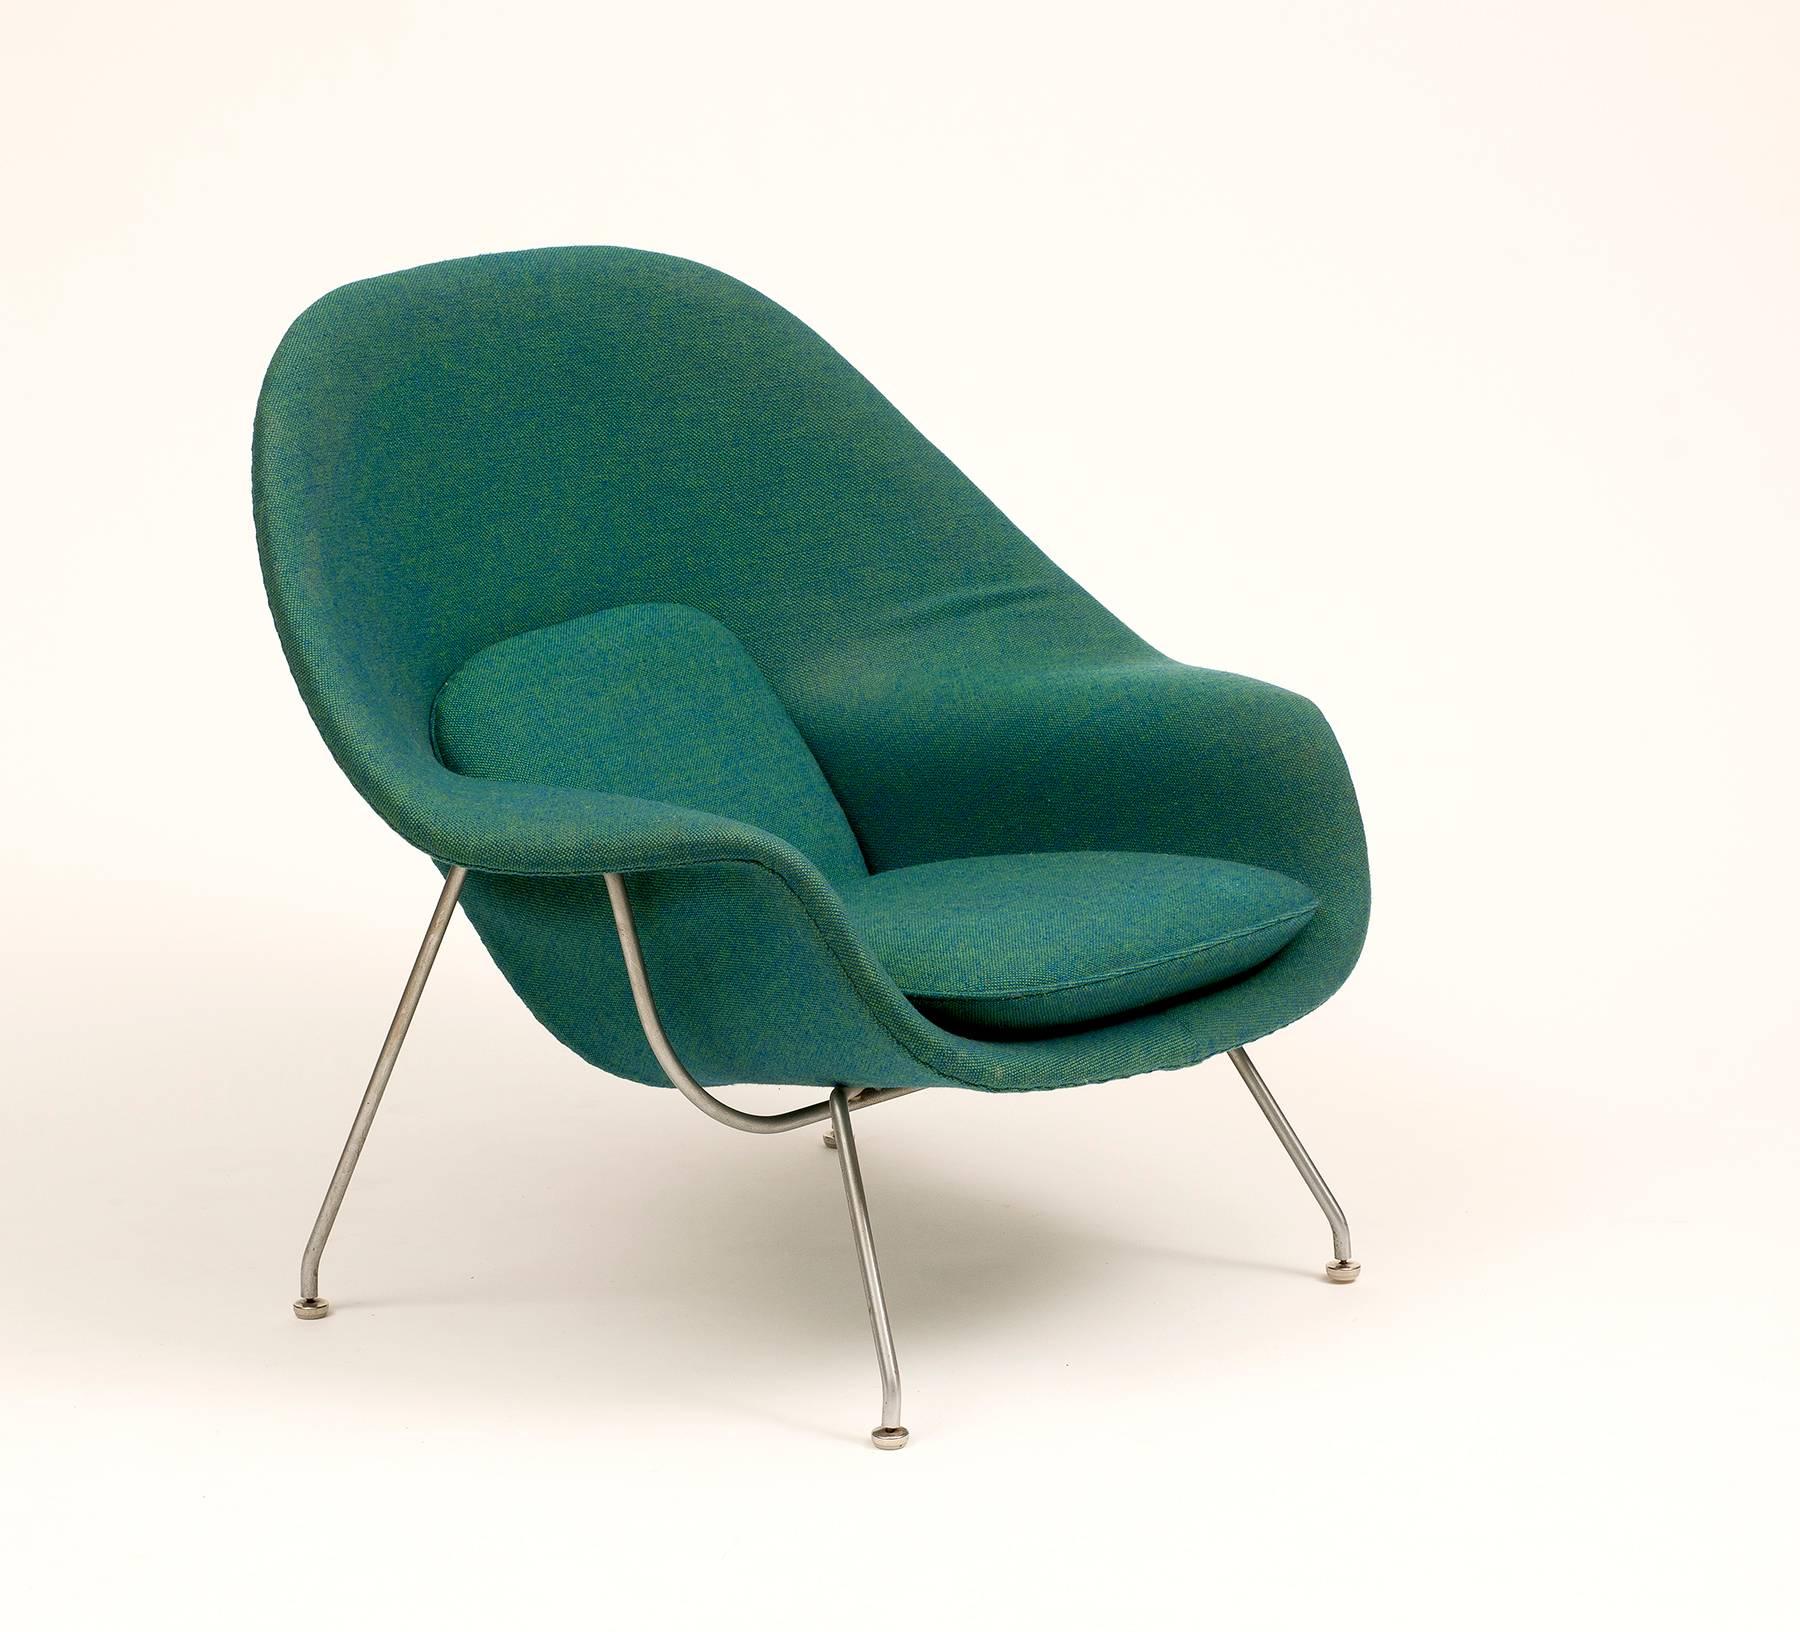 Mid-Century Modern Womb Chair by Eero Saarinen for Knoll in Original Knoll Fabric, 1970s